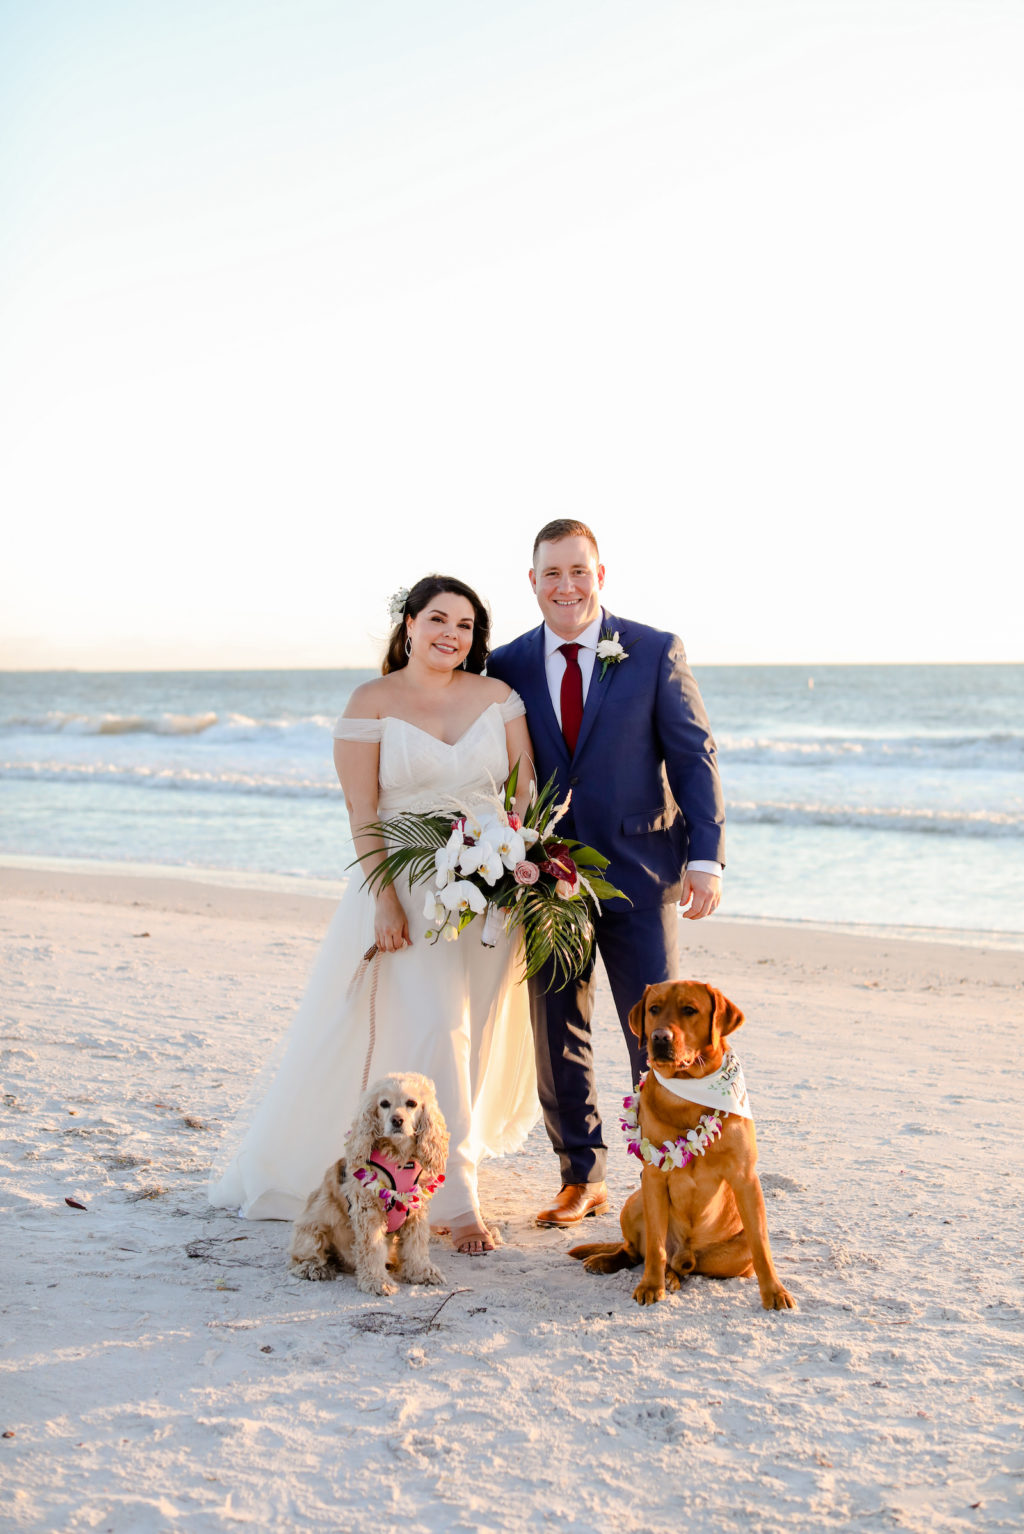 Florida Bride and Groom on the Beach During Sunset with Dogs Wearing Tropical Floral Leis | St. Pete Beach Wedding Venue Postcard Inn | Tampa Wedding Photographer Lifelong Photography Studio | Wedding Florist Iza's Flowers